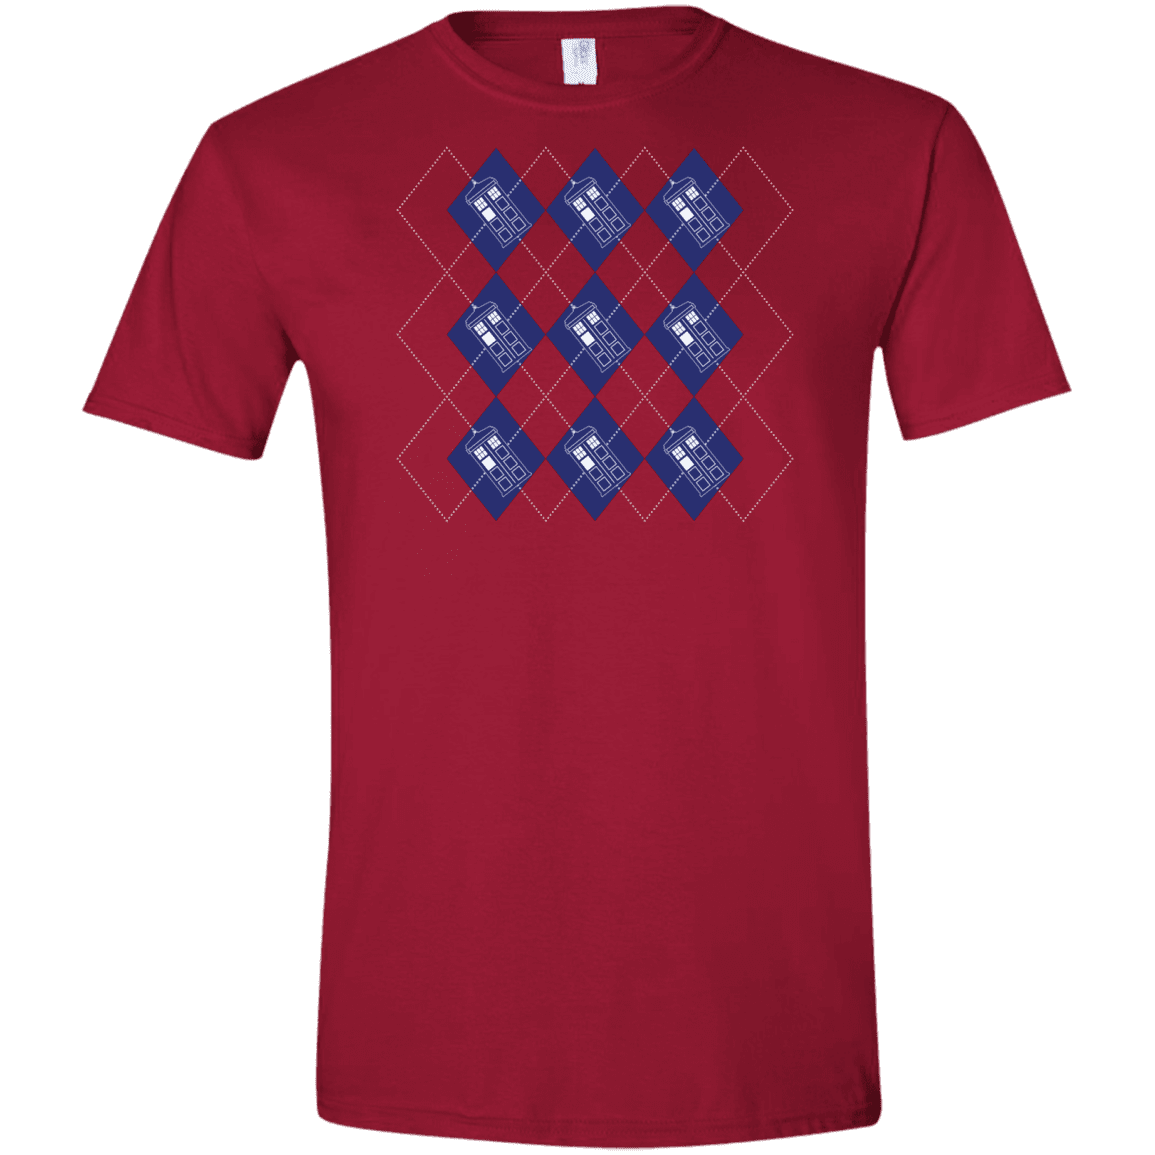 T-Shirts Cardinal Red / S Argyle Tardis Men's Semi-Fitted Softstyle